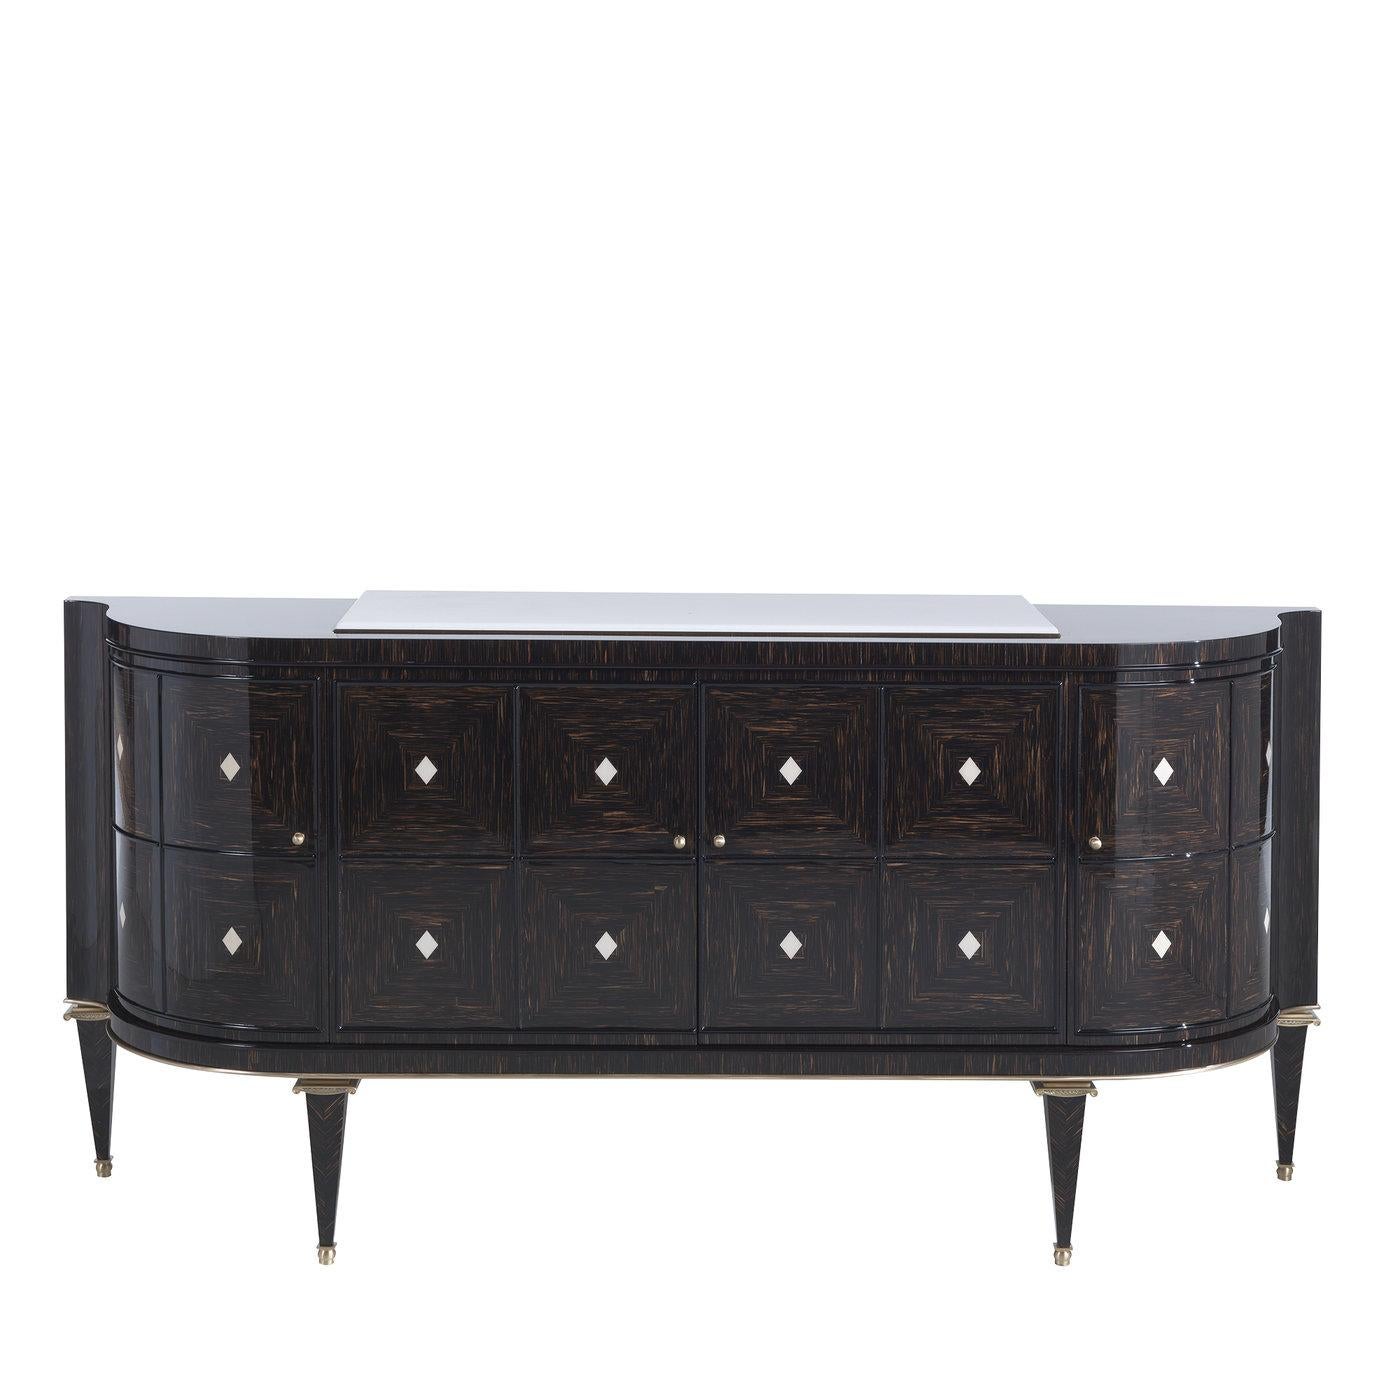 Standing tall on four tapered legs, this stately sideboard exemplifies a distinguished approach to modern, functional design. Crafted of solid palm wood, the streamlined demi-lune silhouette features two central doors flanked by two side doors